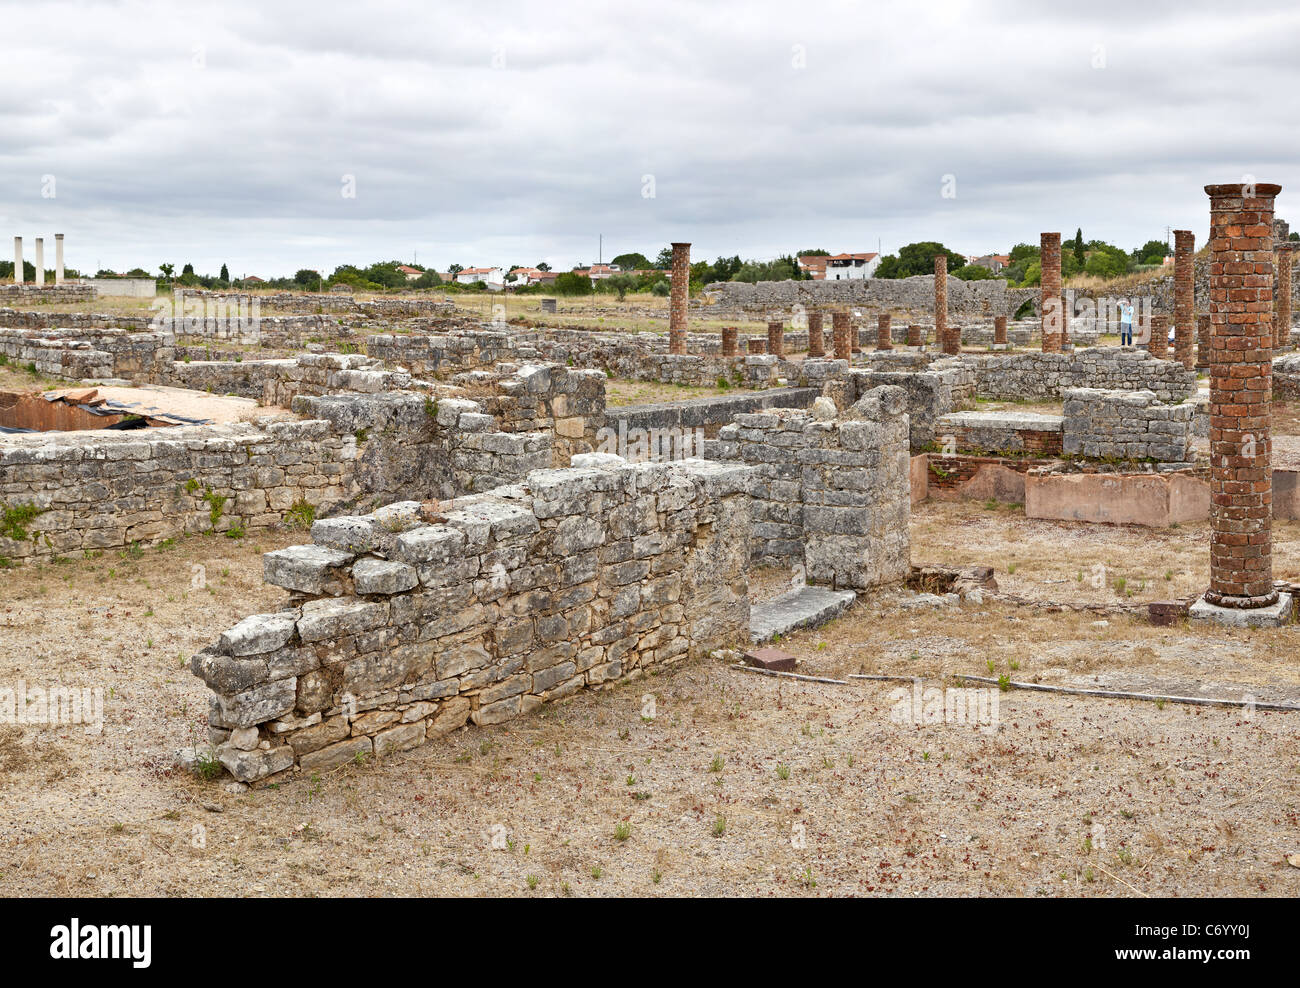 House of Cantaber villa in Conimbriga, the best preserved Roman city ruins in Portugal. Stock Photo